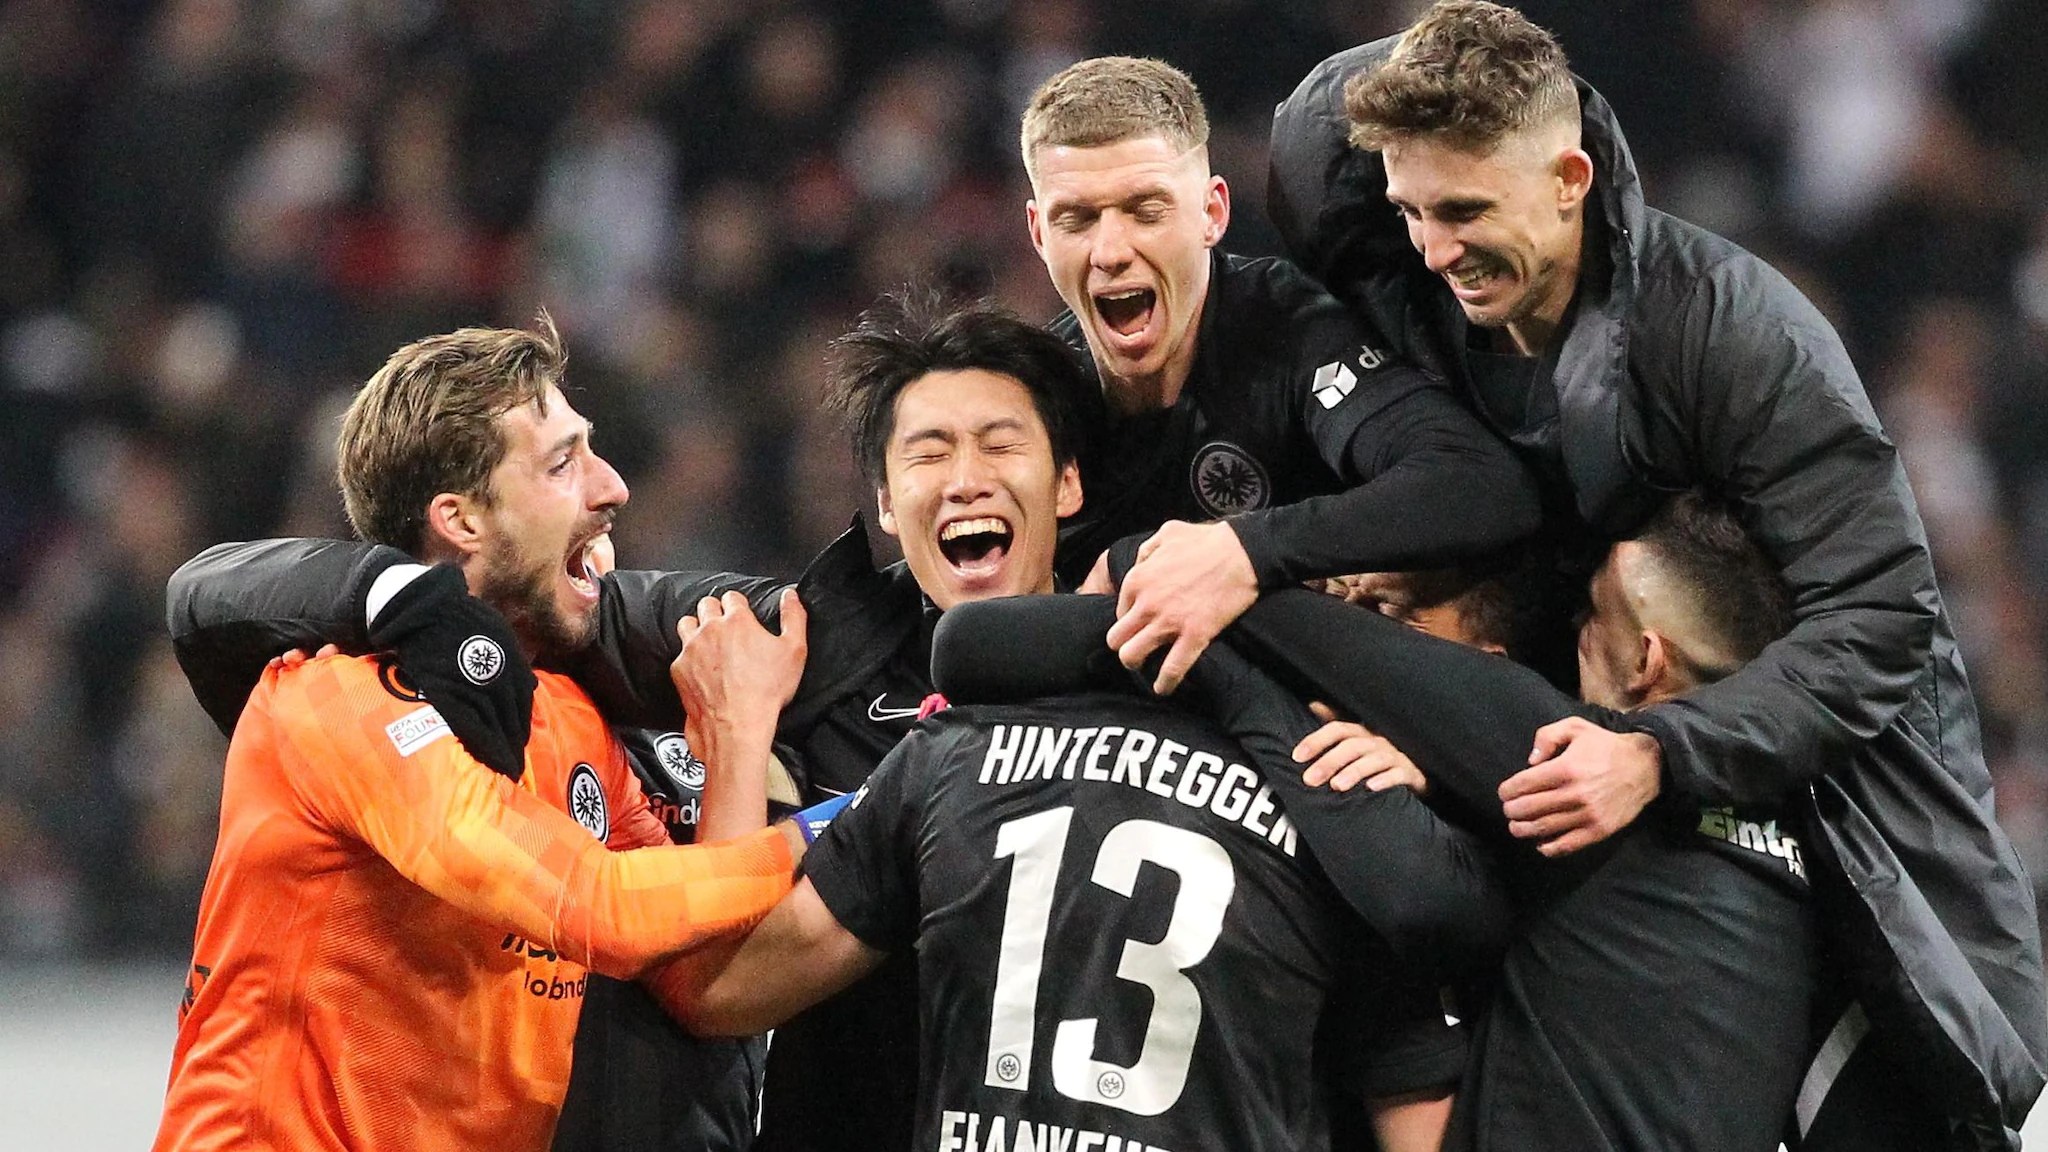 Eintracht Frankfurt vs Barcelona Live: Barca looking to edge past Frankfurt for a place in the Europa League semi-finals; Latest Team News, Injuries and Suspensions, Predicted Lineups, Live Streaming